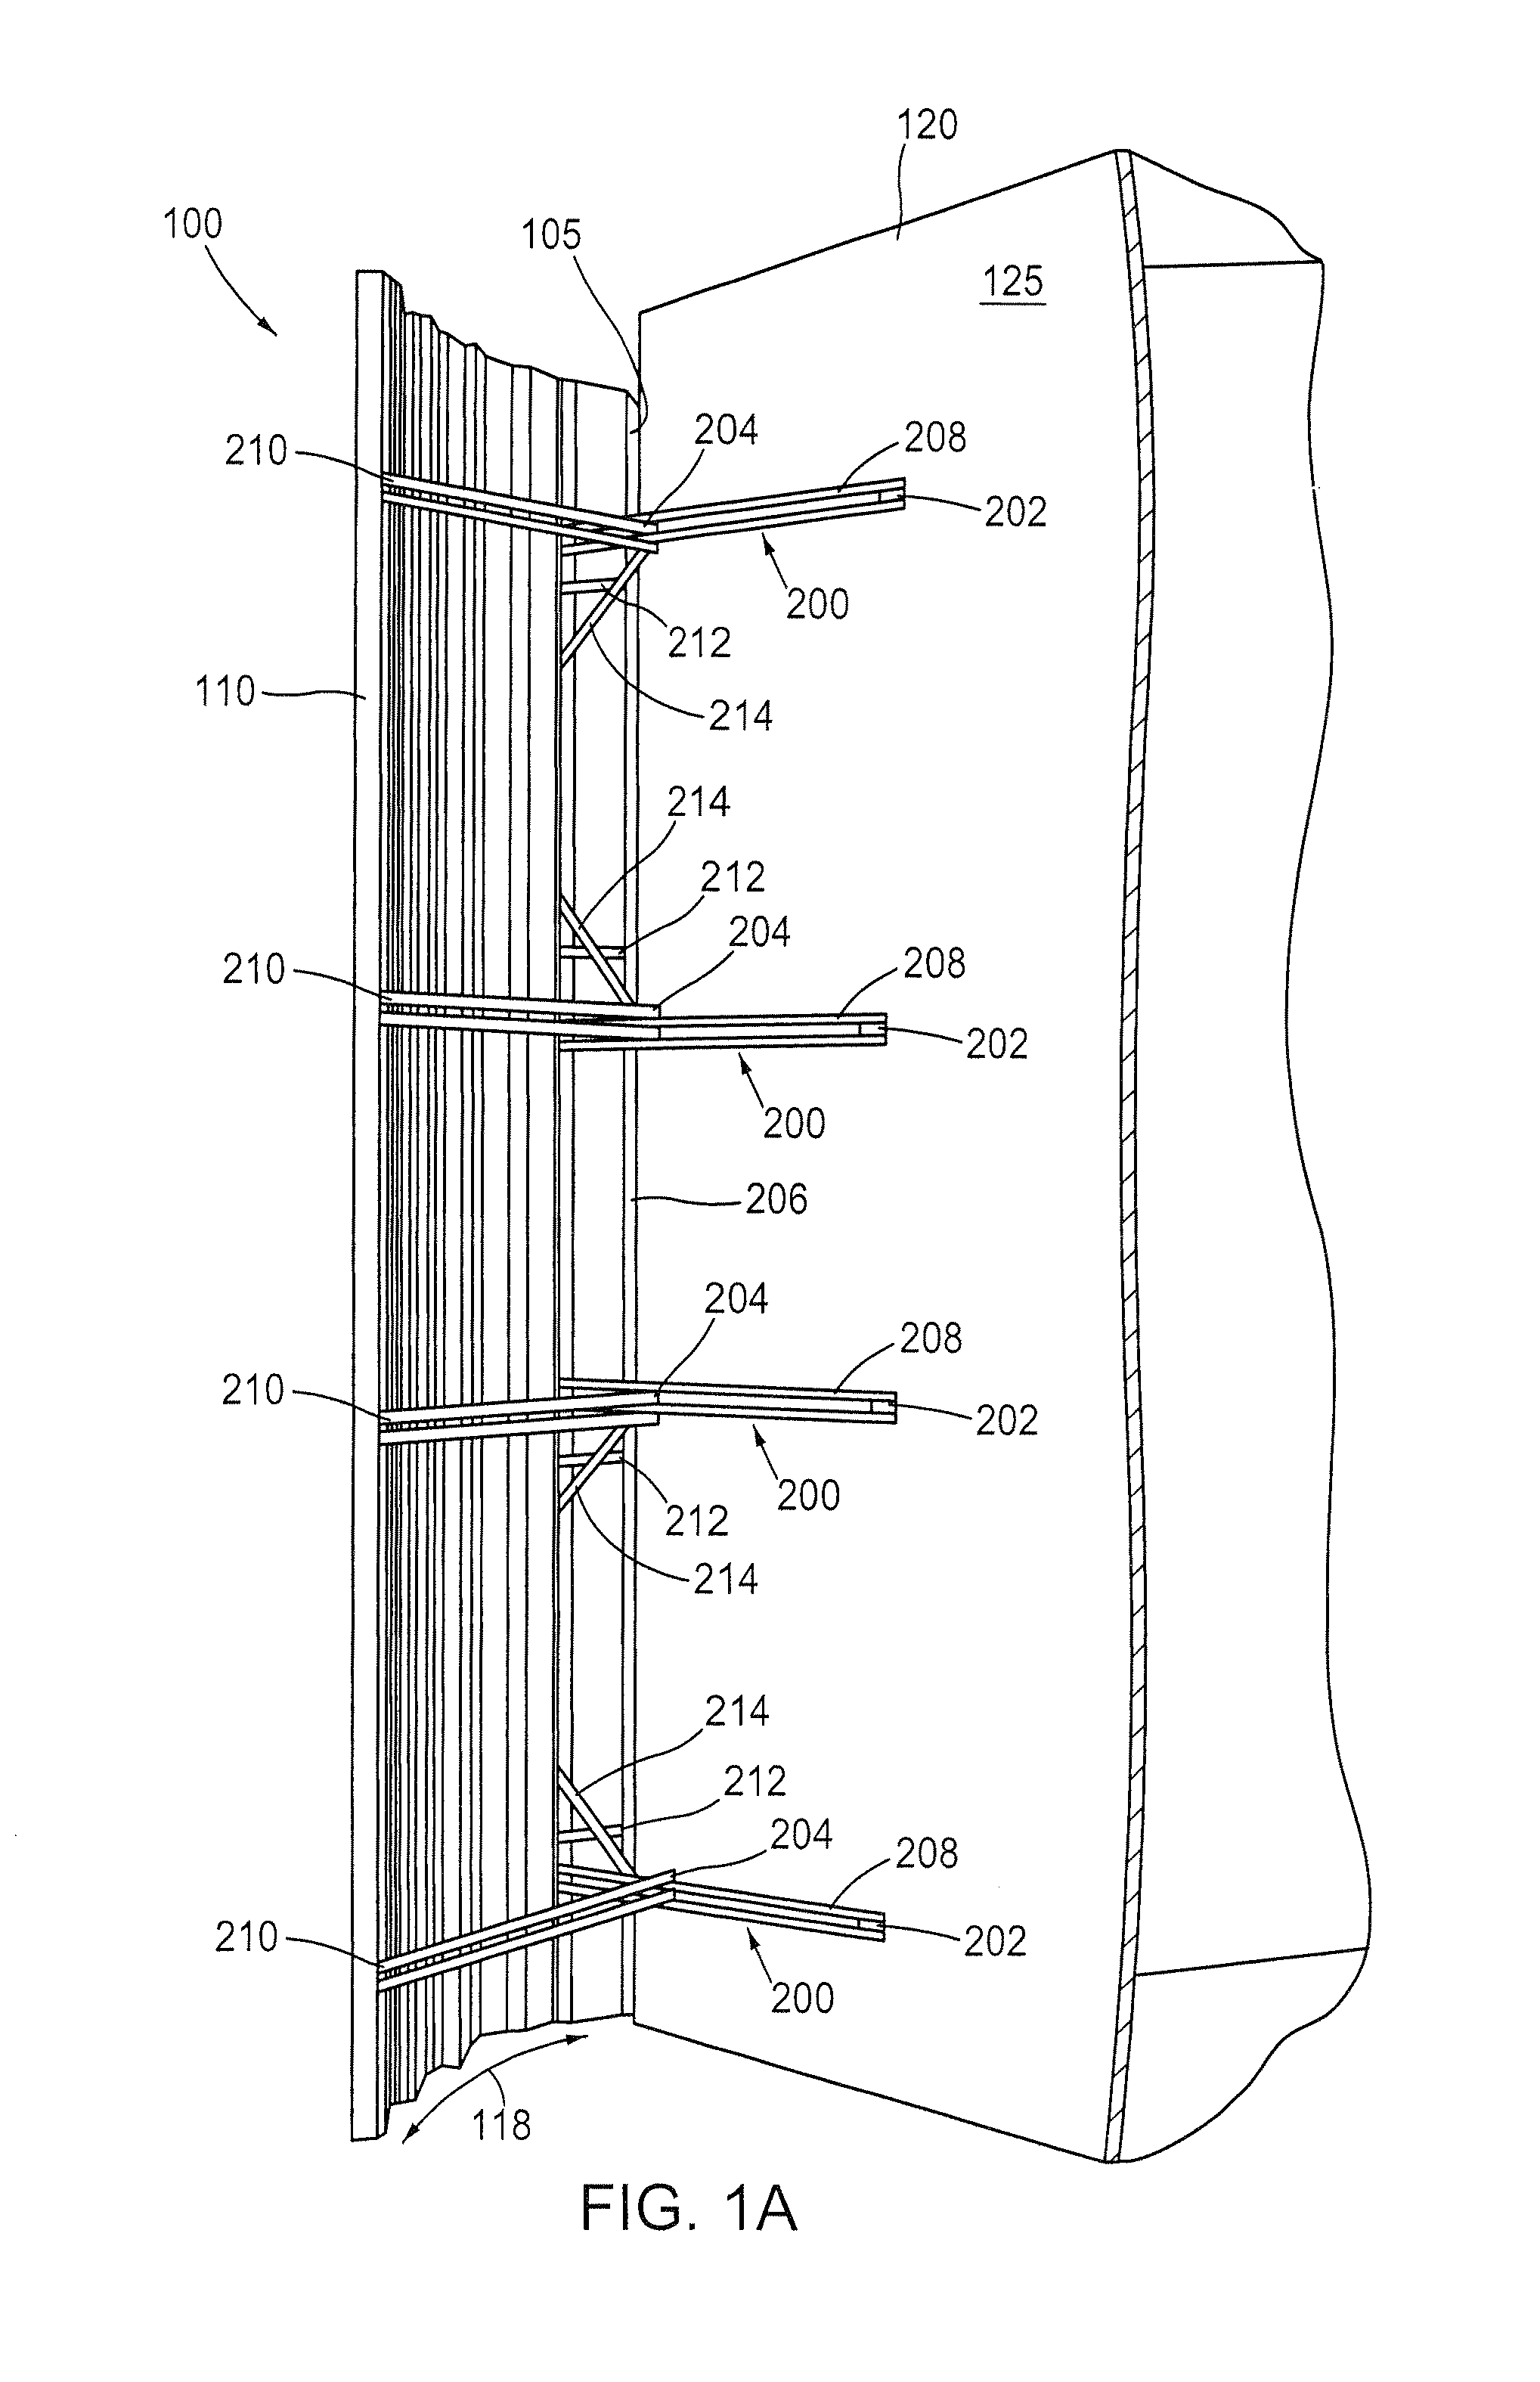 Apparatus for reducing drag on a vehicle